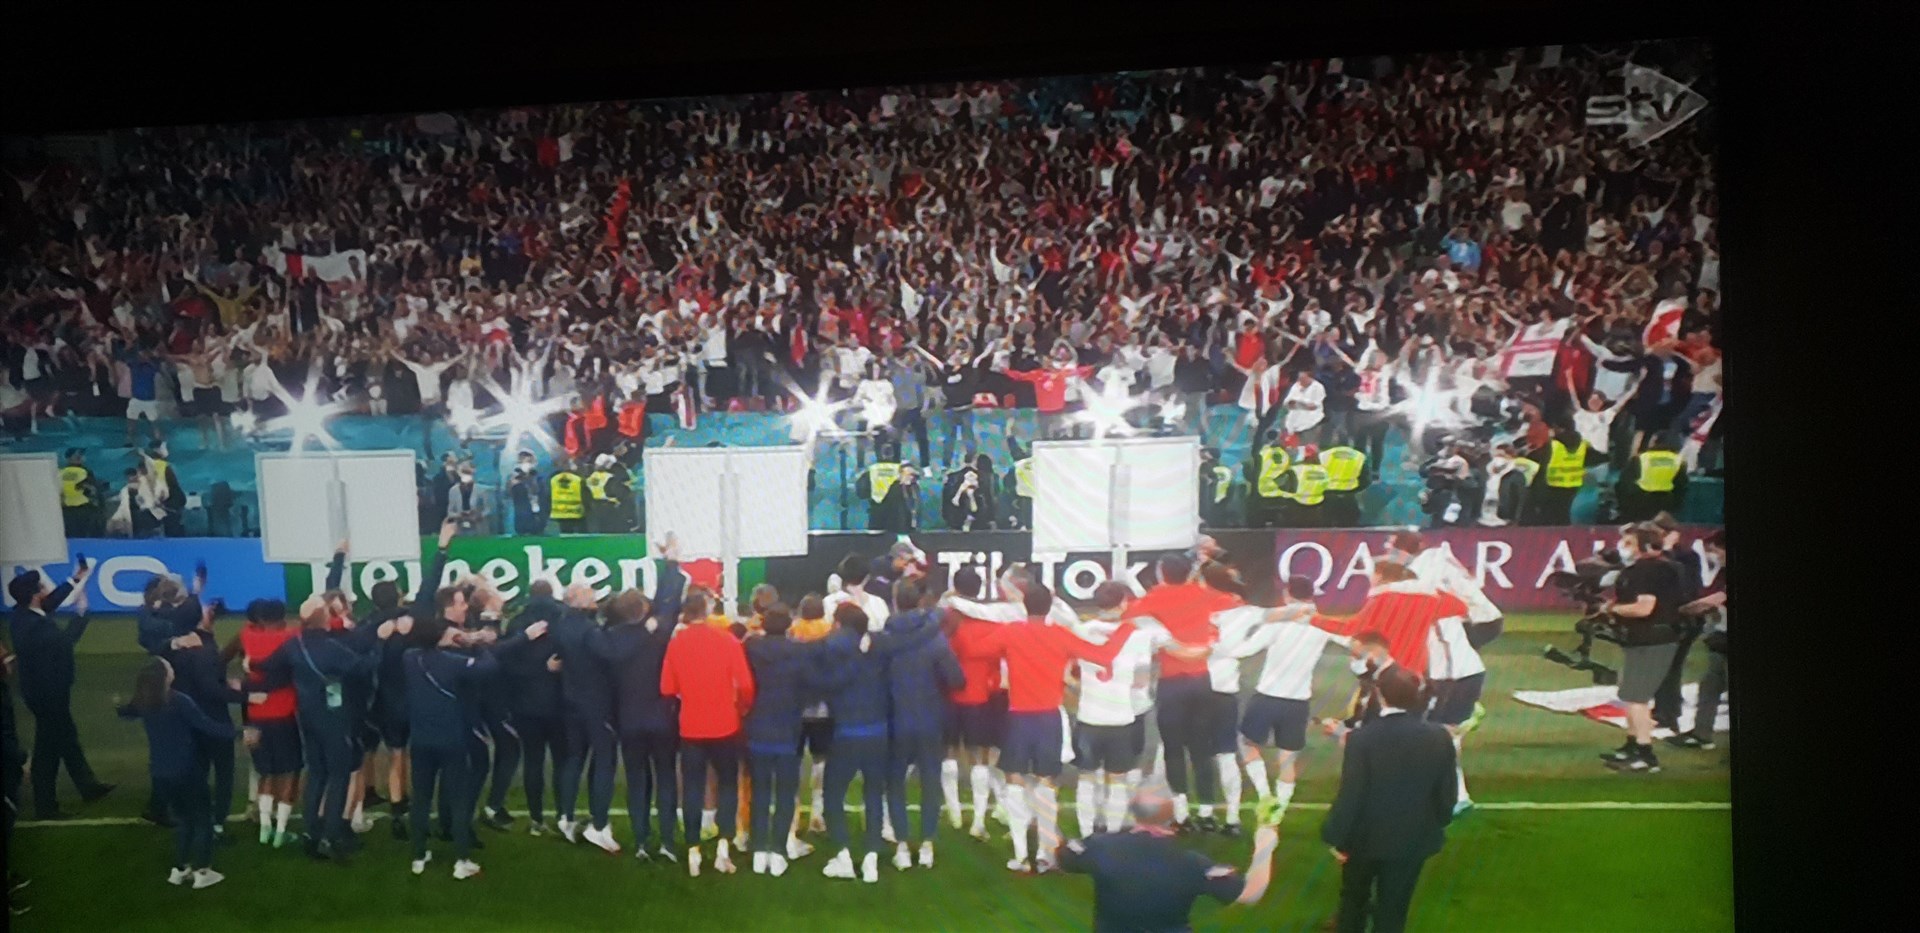 The England team celebrate with their fans.